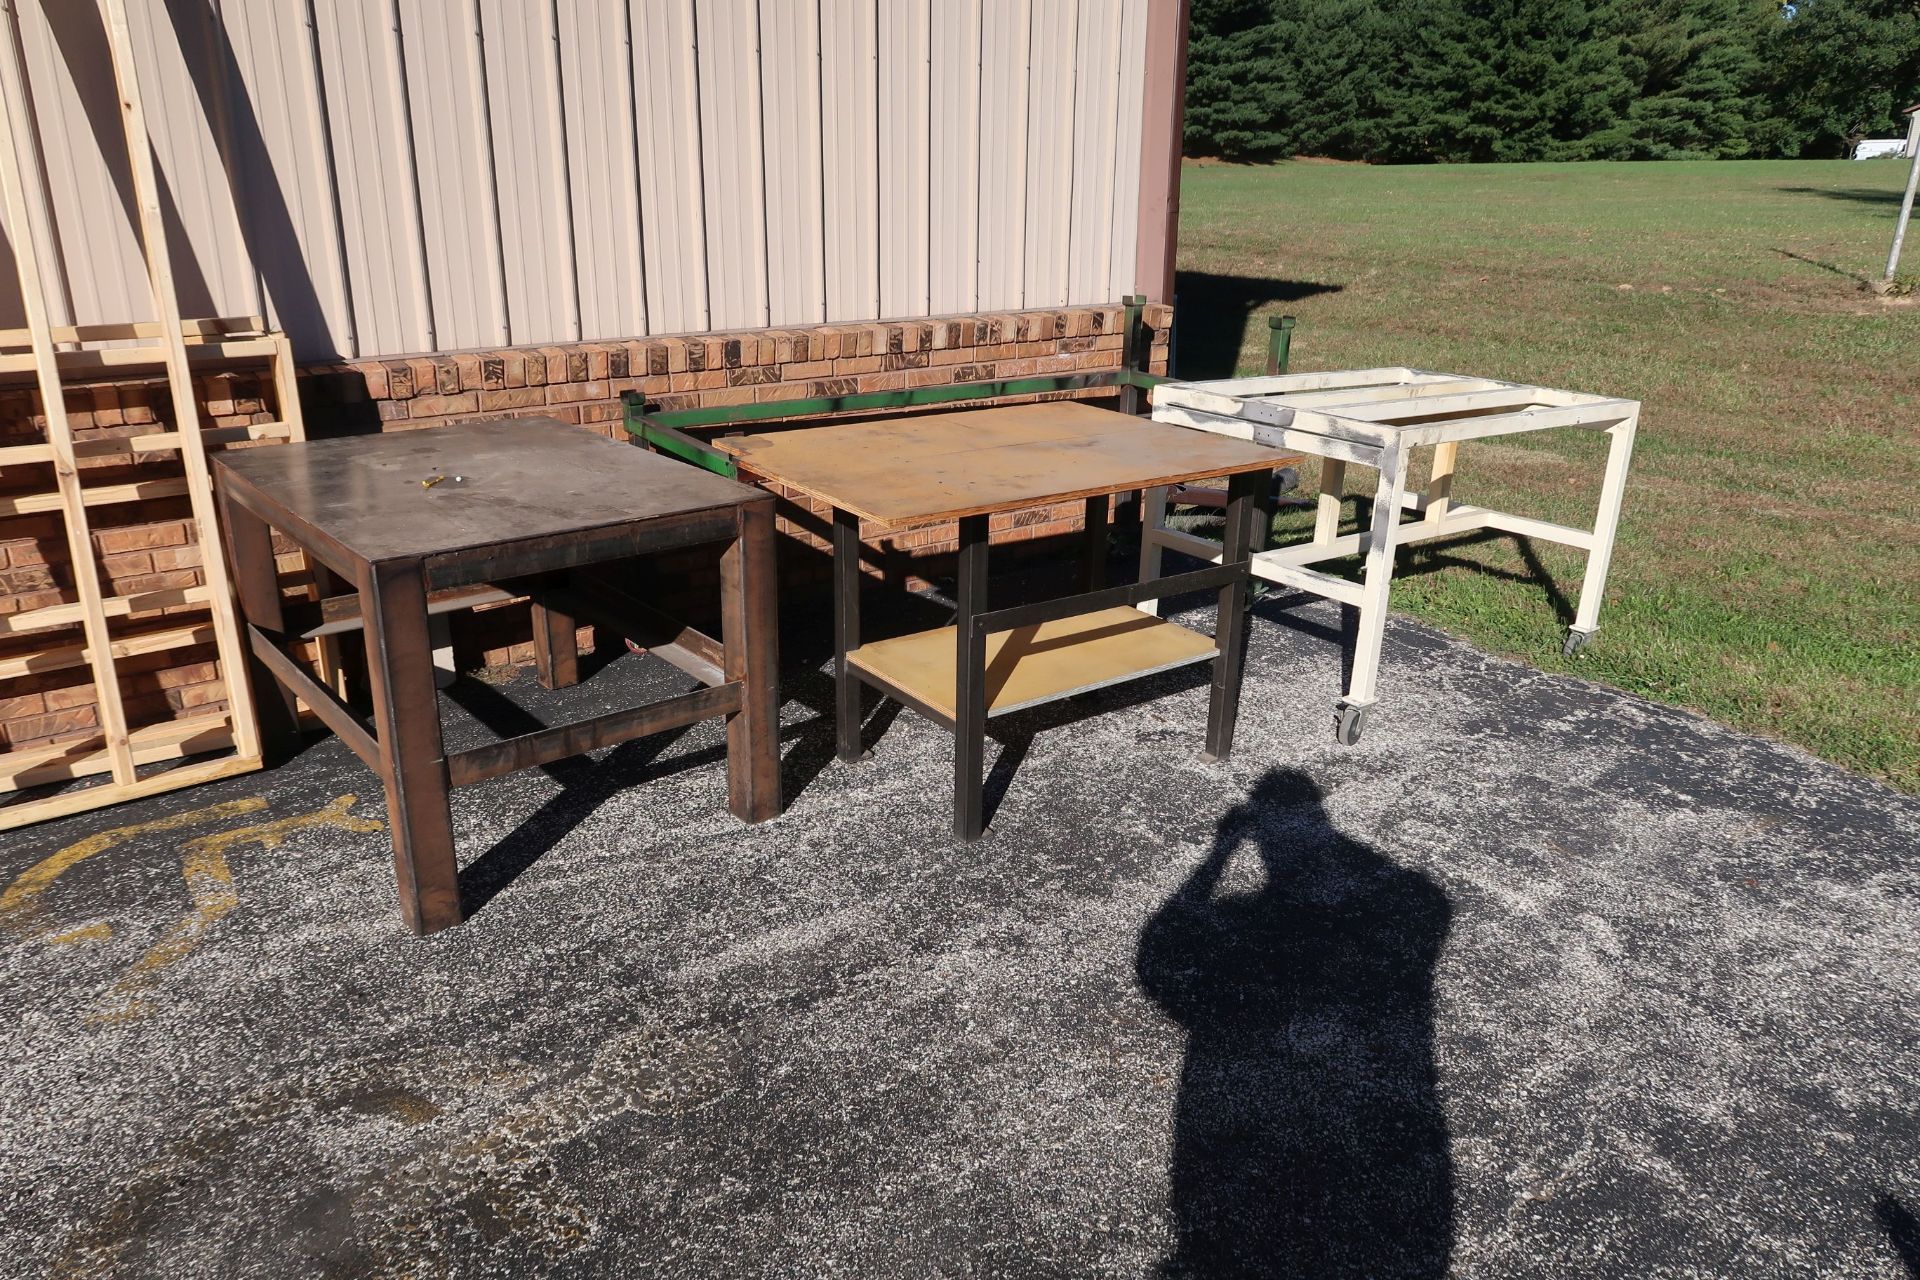 (LOT) MISCELLANEOUS STEEL FRAMED BENCHES